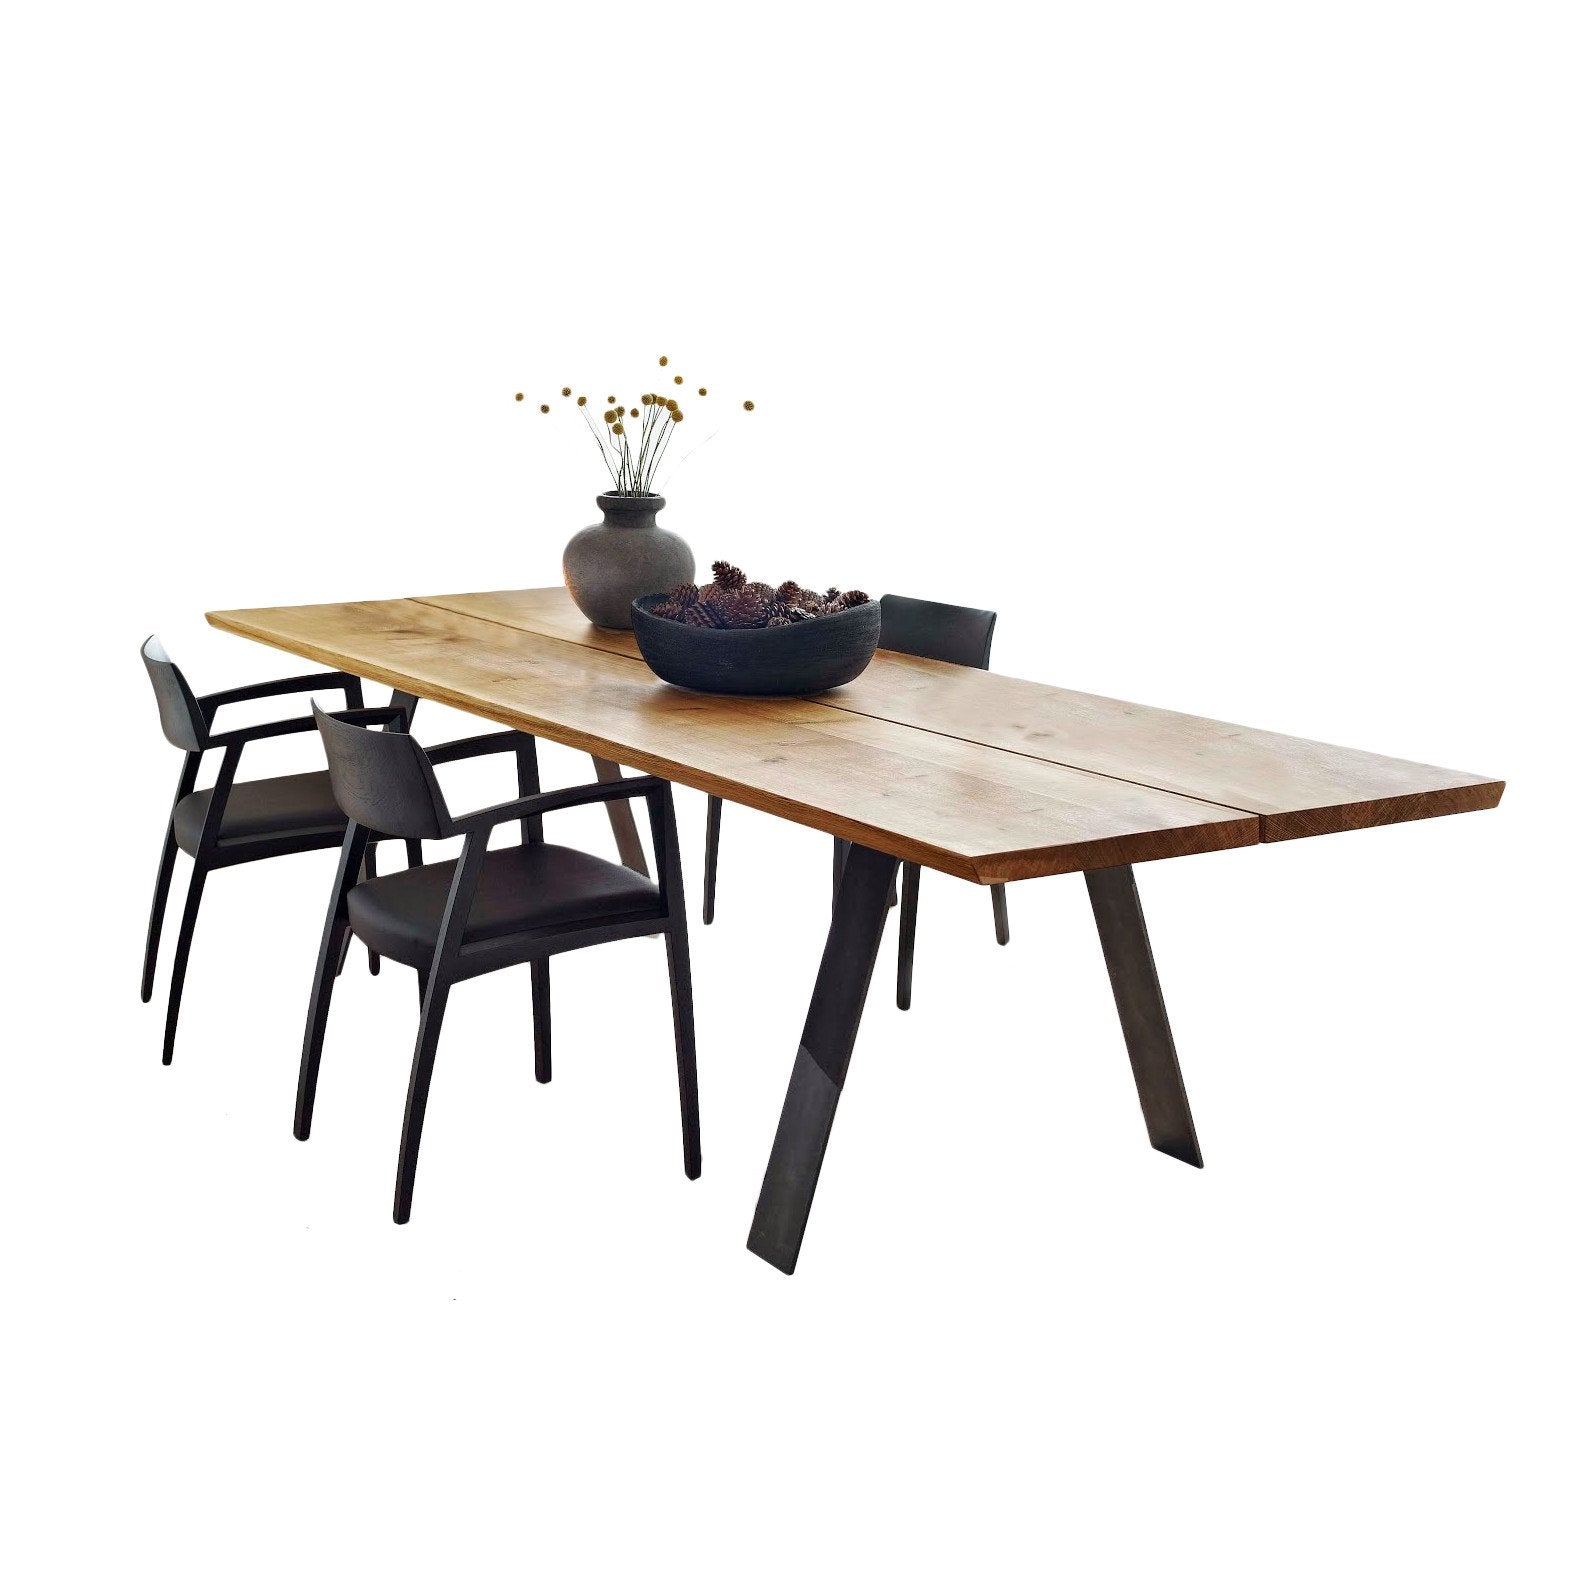 GM3200 Plank Table